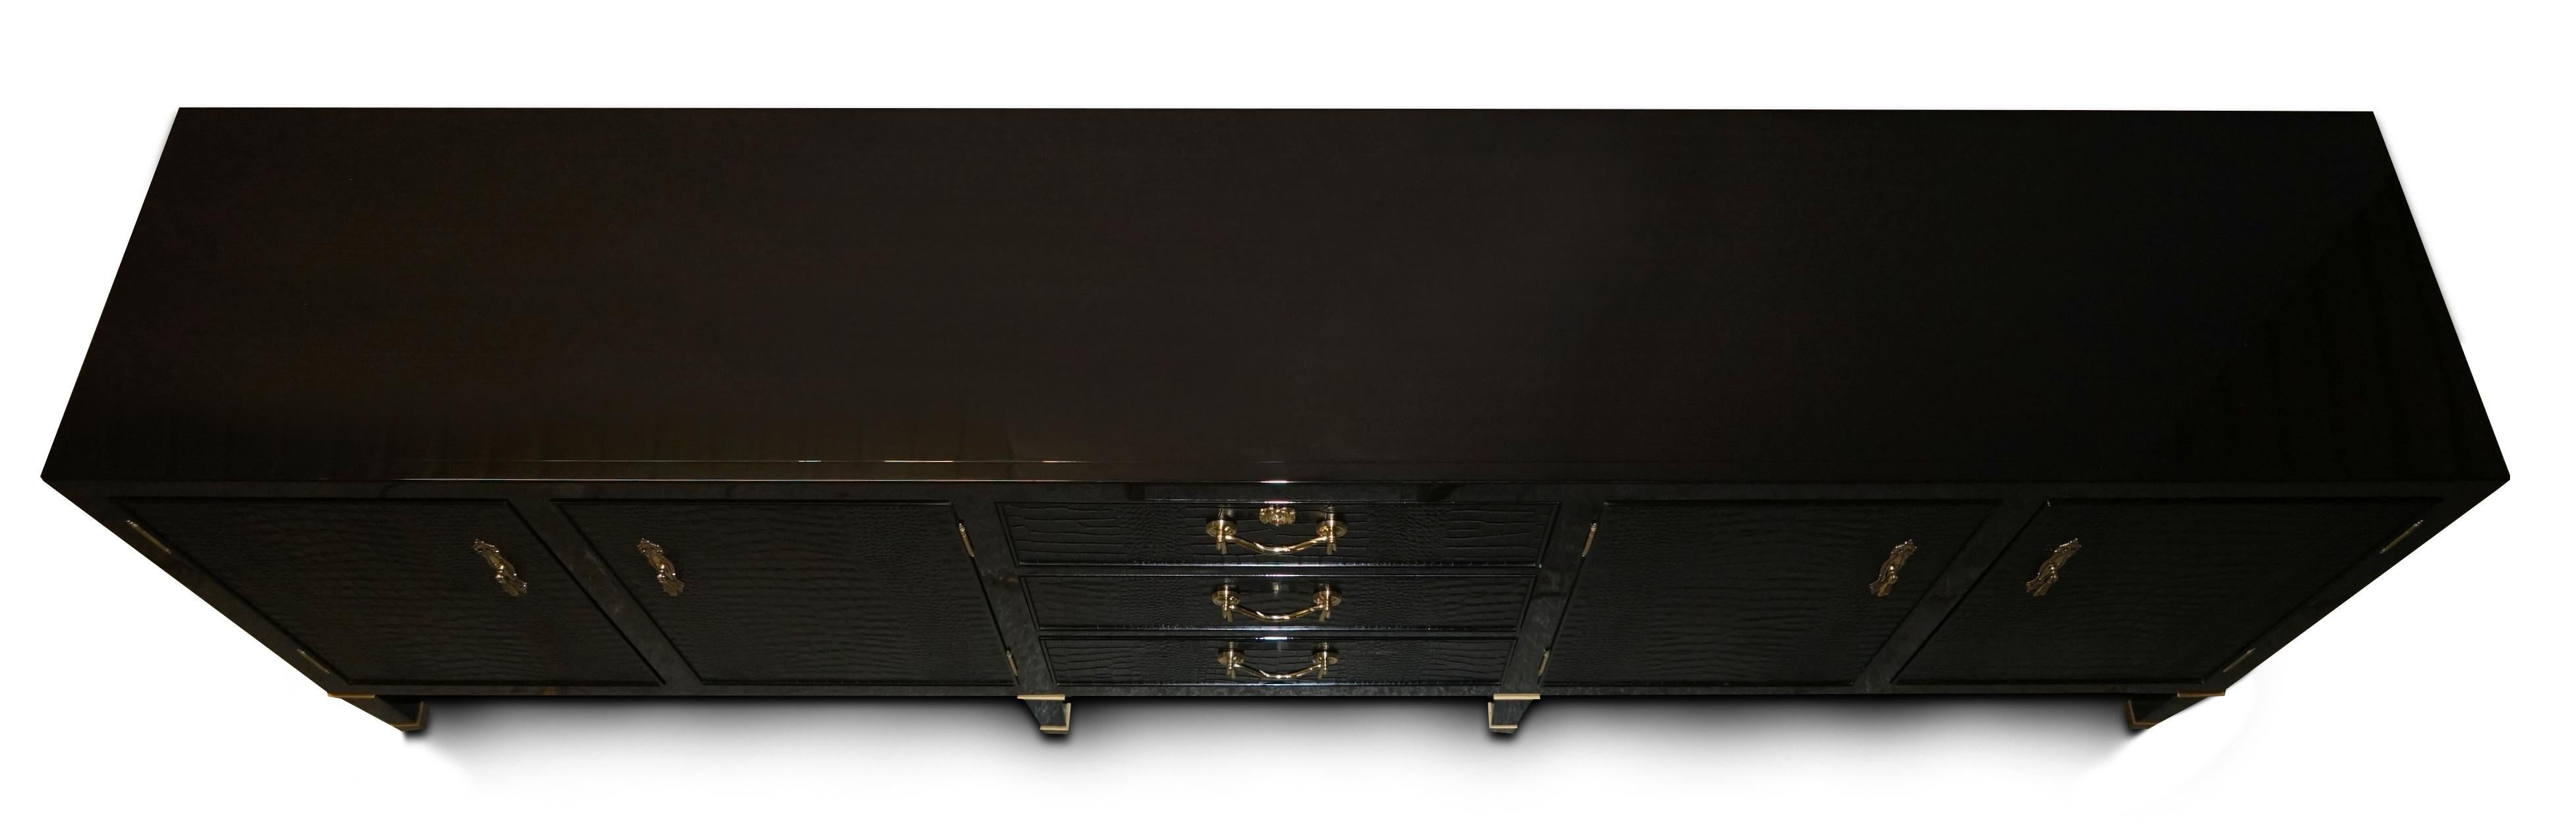 Ralph Lauren Brook Street Chest of Drawers Sideboard Alligator Leather For Sale 5